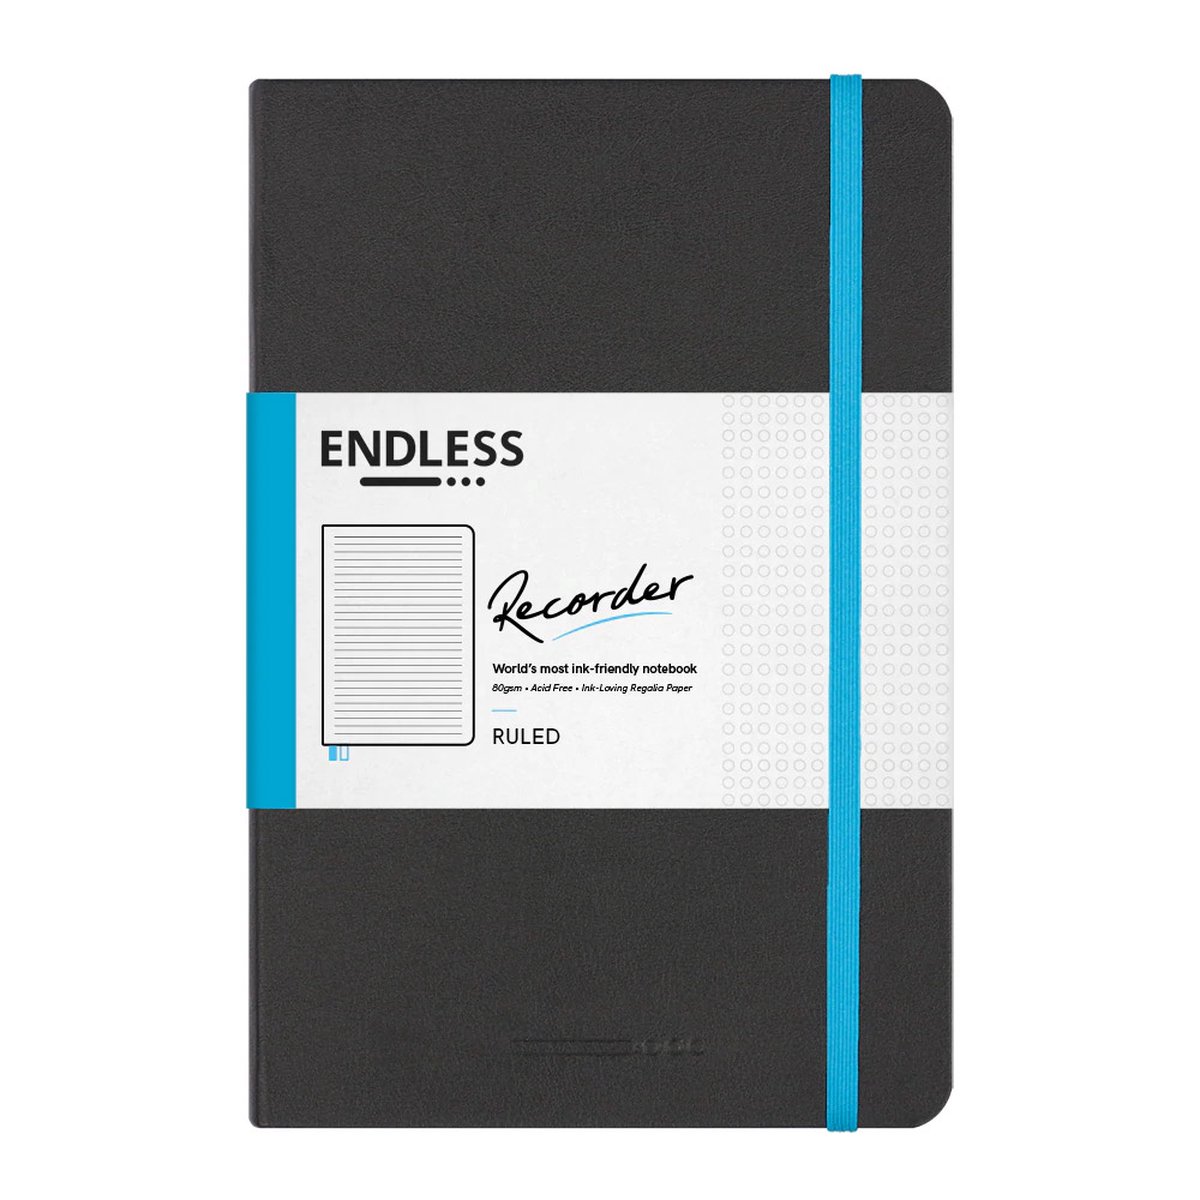 Endless Recorder Notebook Infinite Space Regalia Paper - Ruled